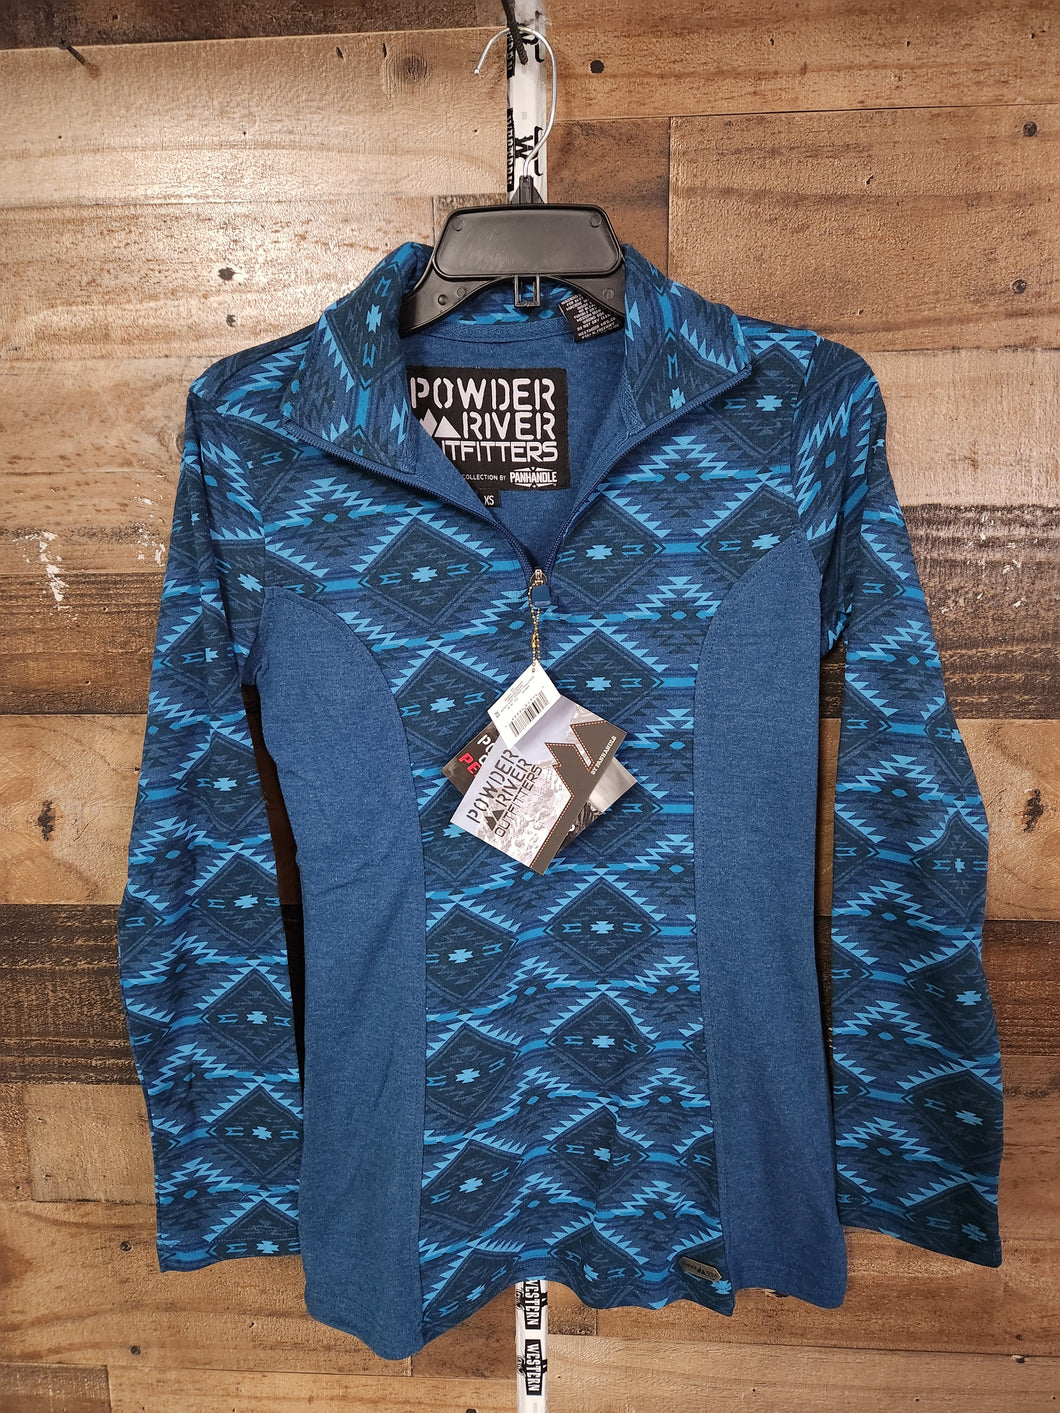 Powder River Women's sweater - Bright Turquoise